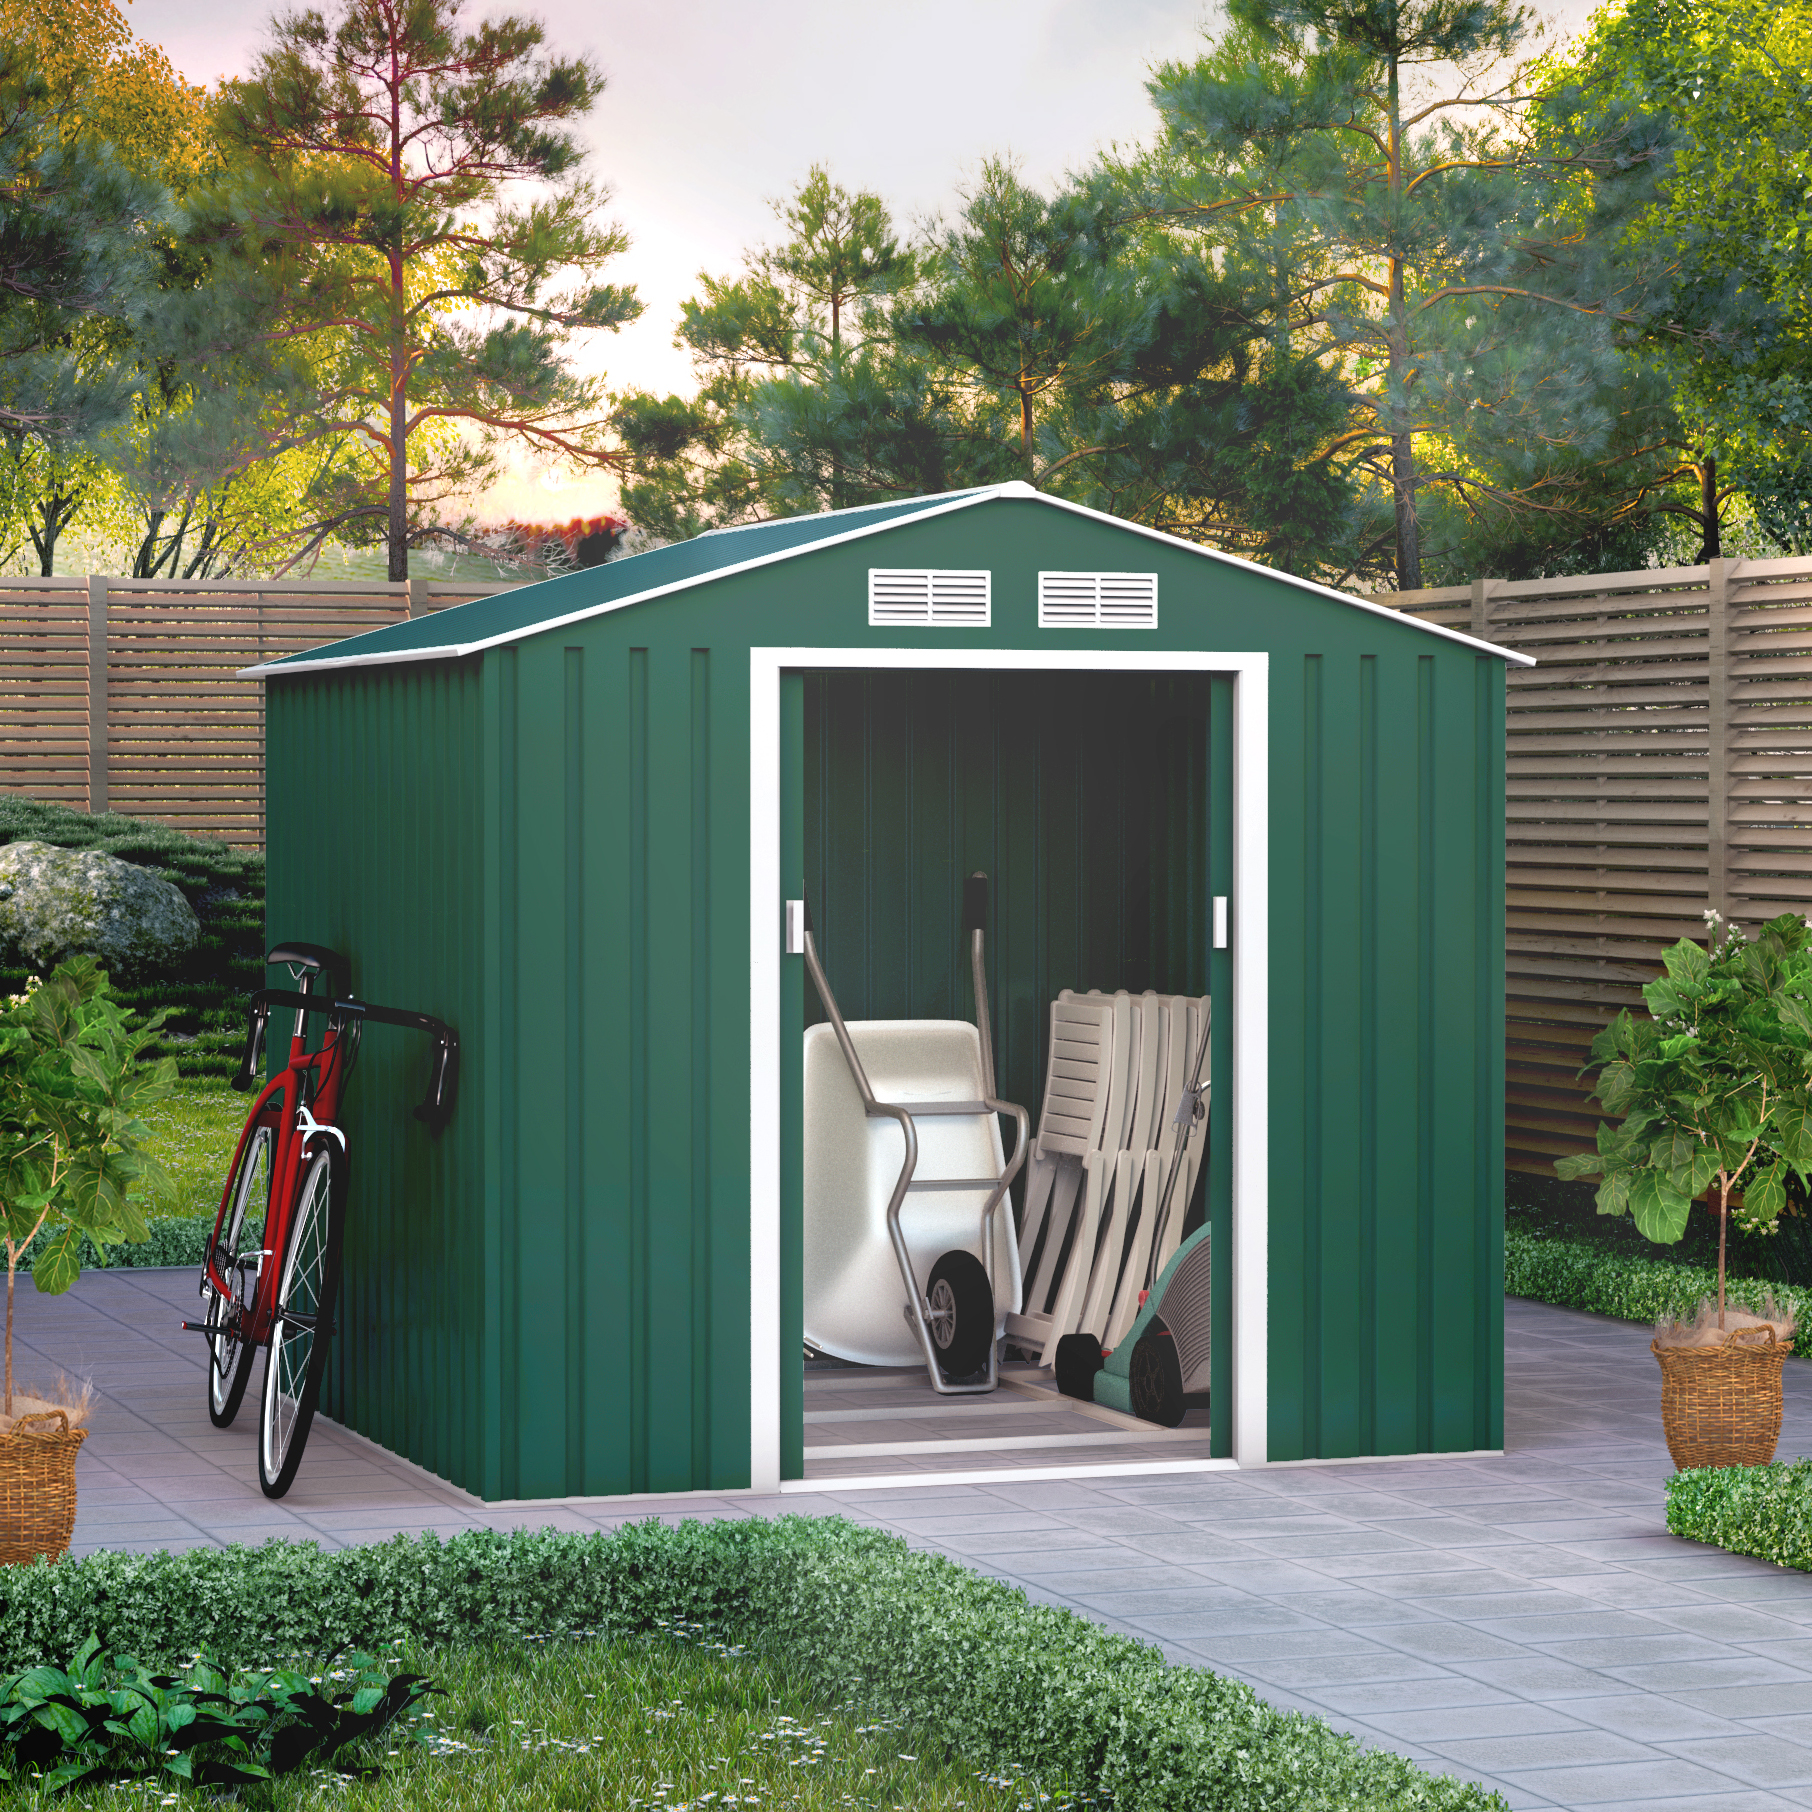 7x6 Ranger Apex Metal Shed With Foundation Kit - Dark Green BillyOh